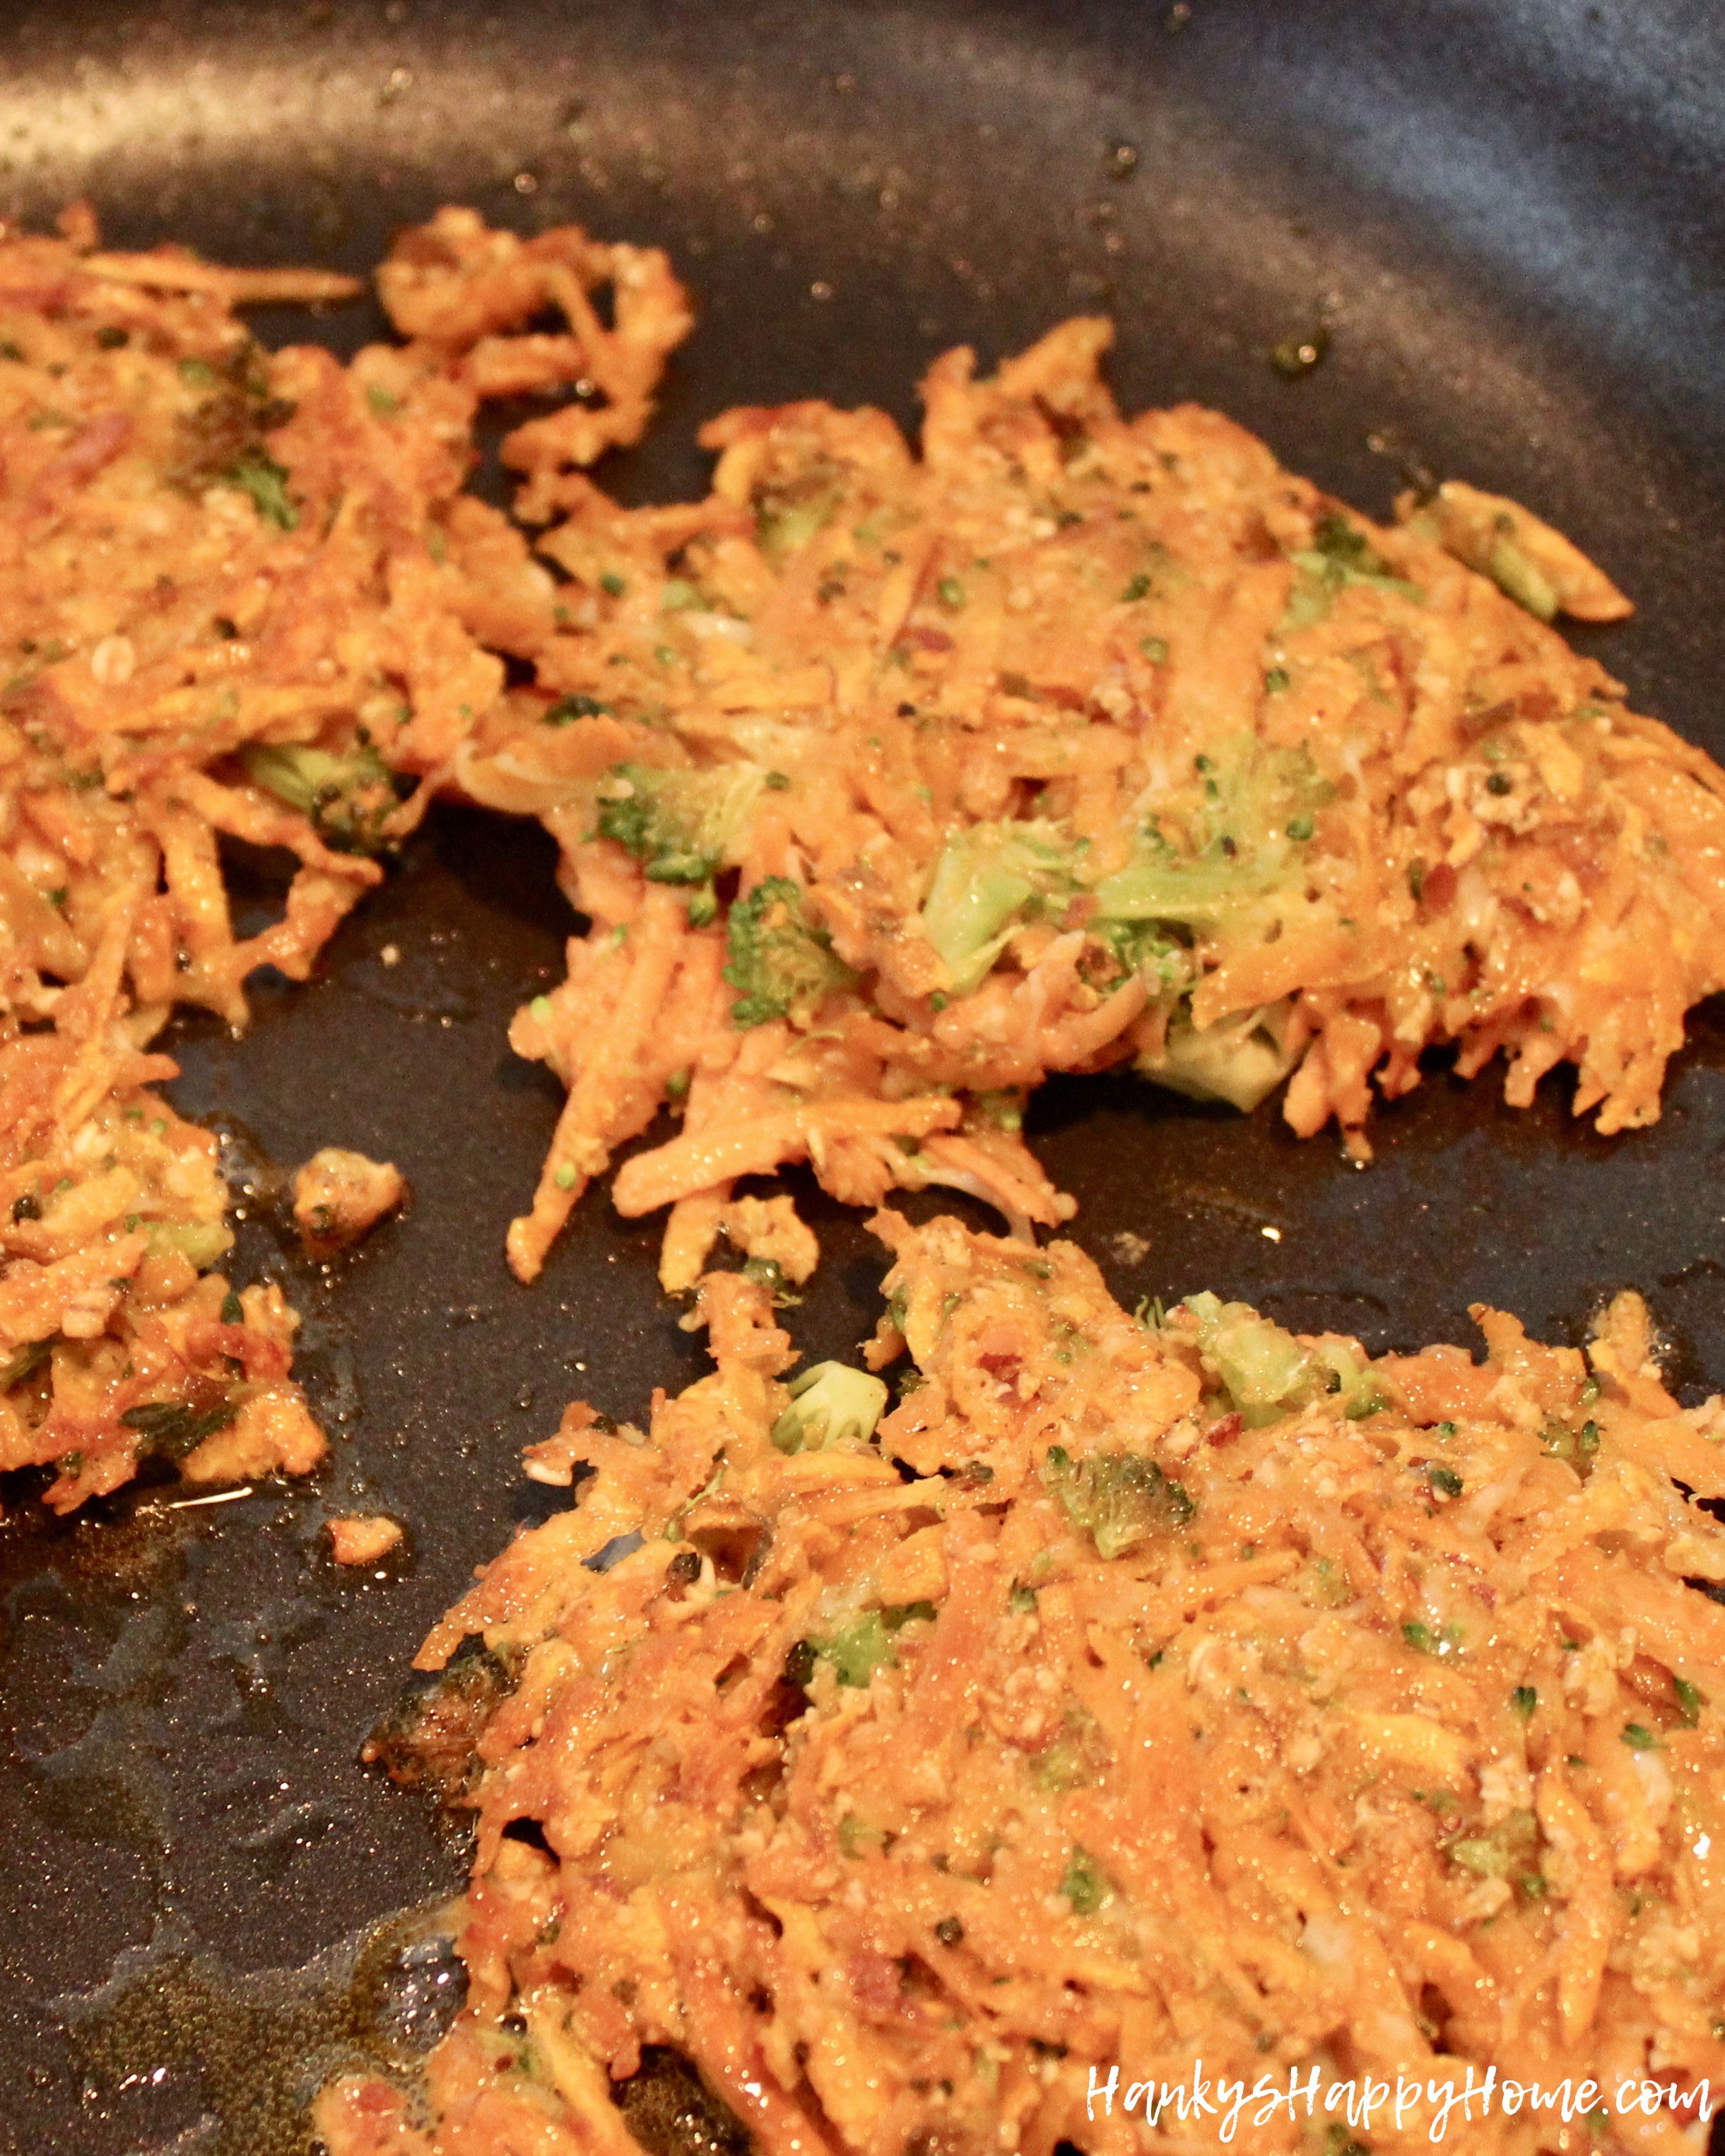 These Sweet Potato & Broccoli Fritters make a delicious and nutritious finger food that is an easy side to add to lunch or dinner!